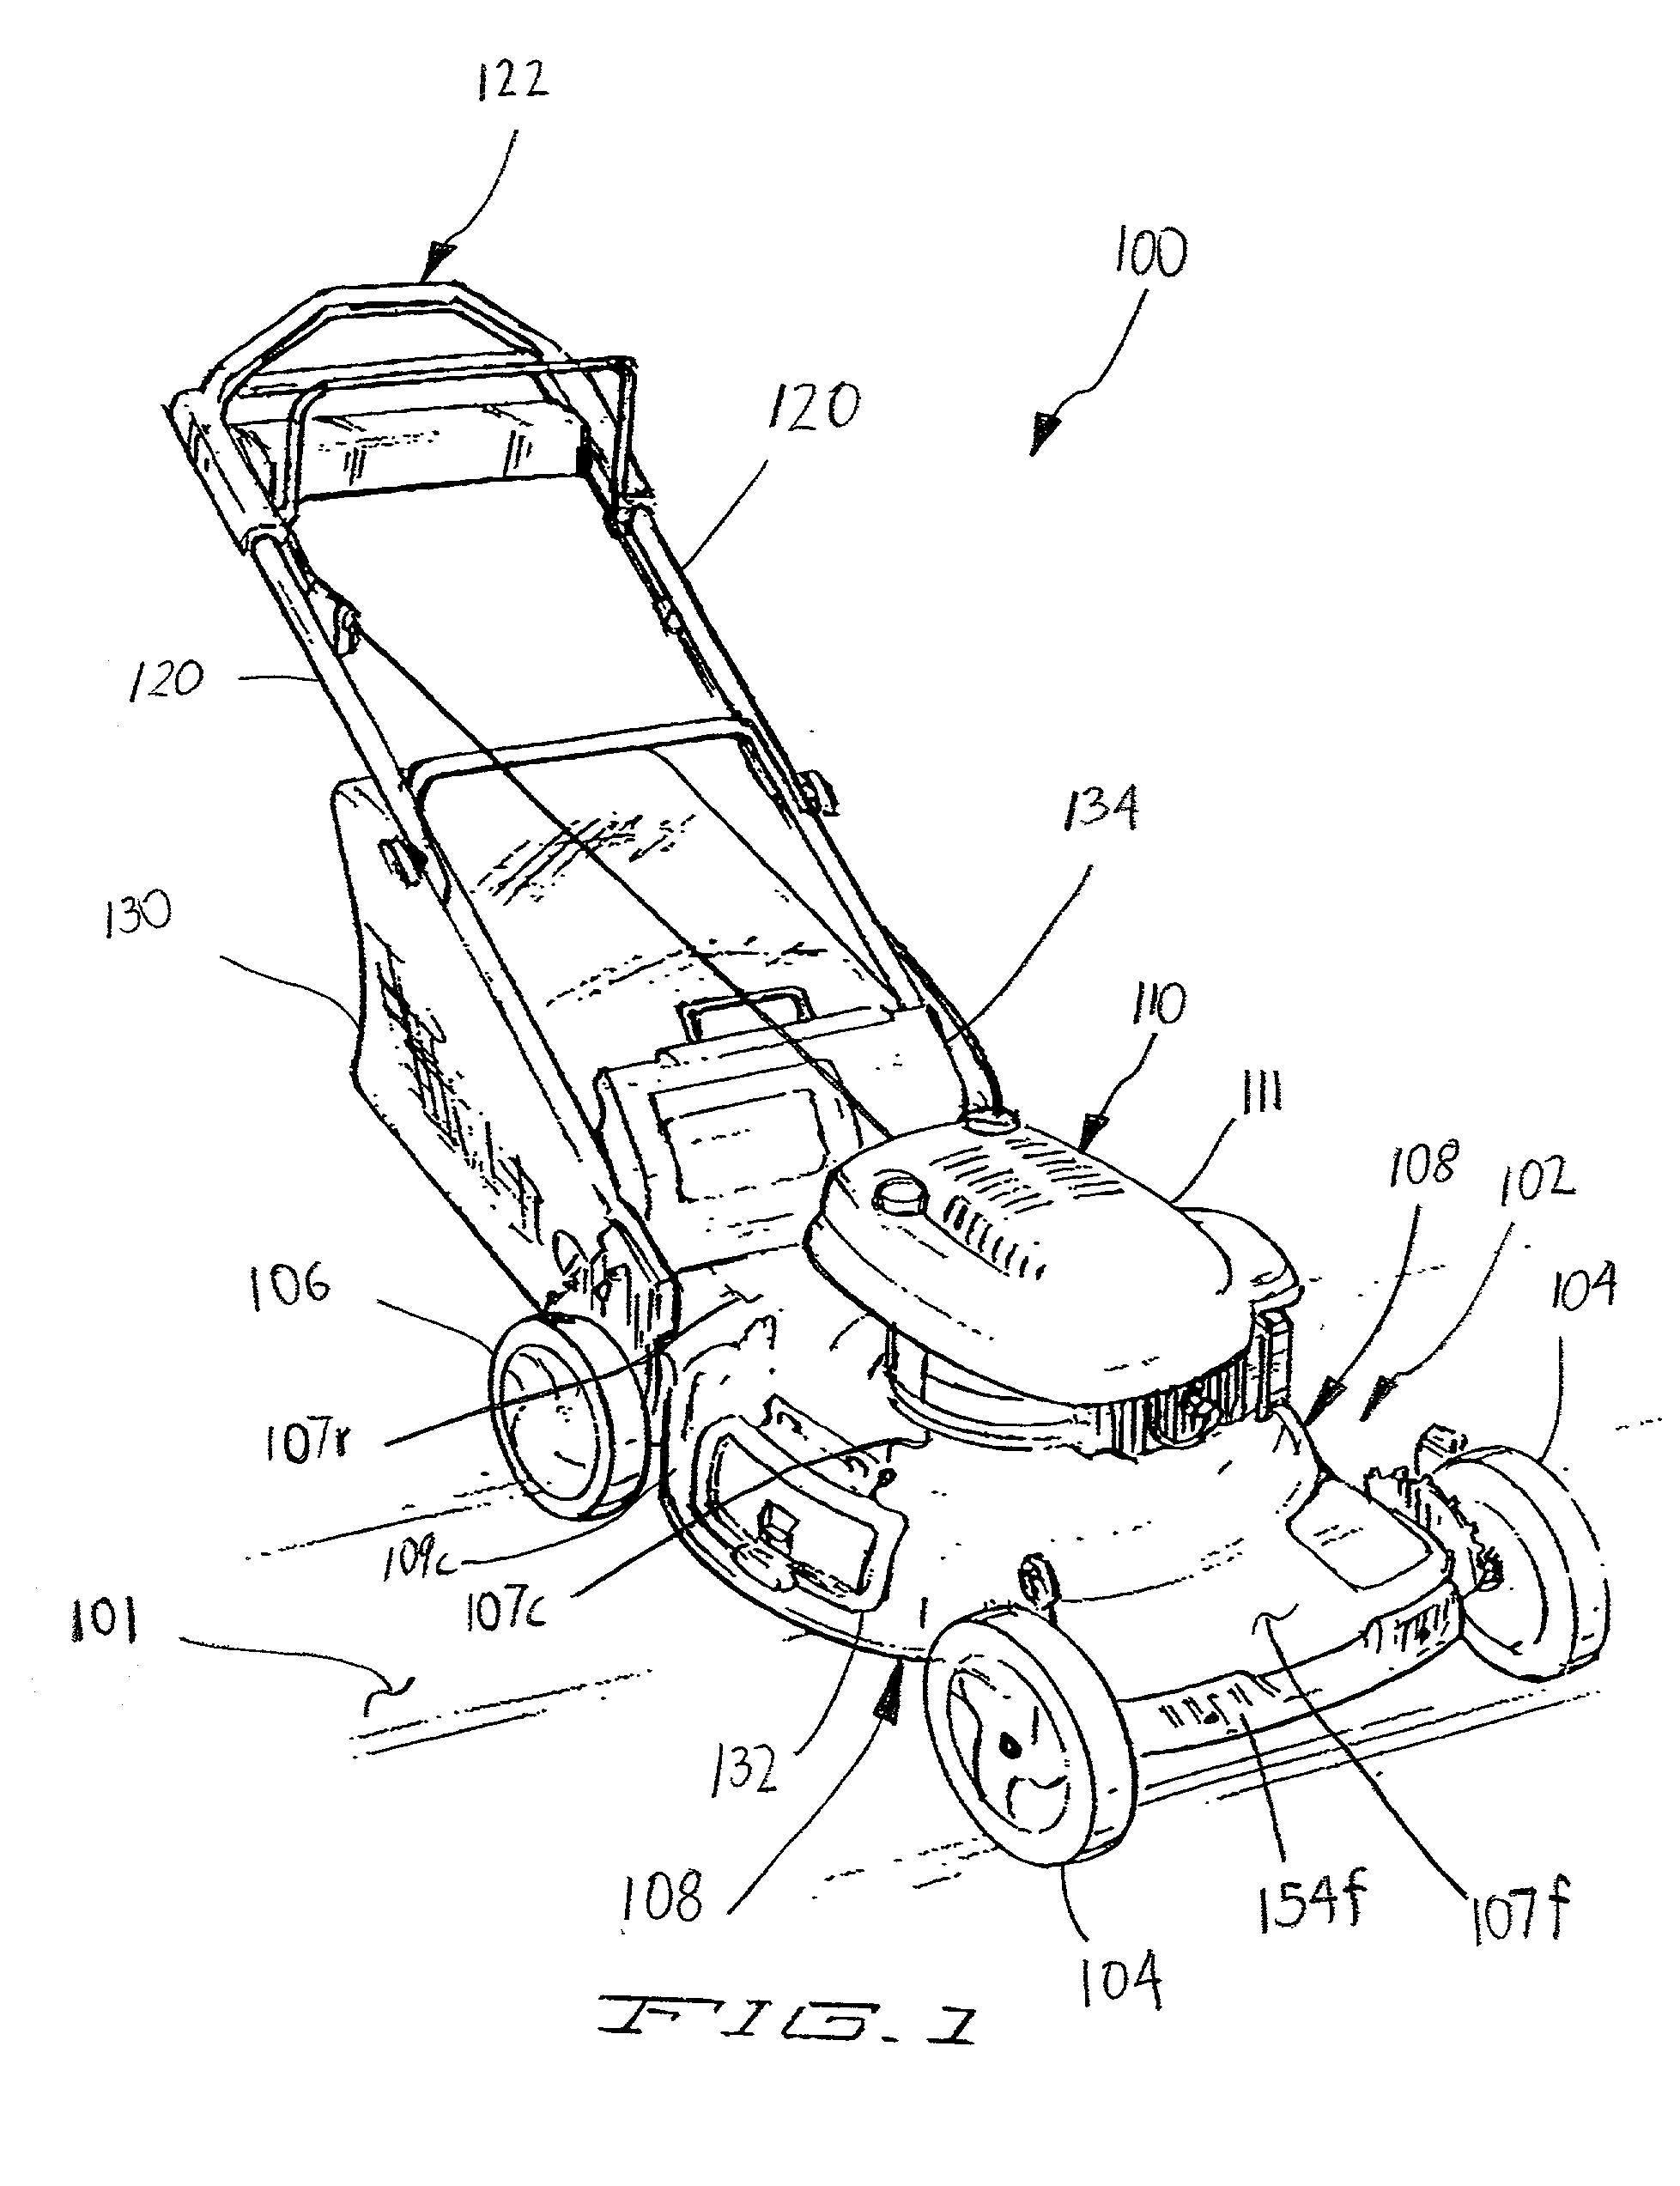 Deck assembly for a self-propelled, walk-behind rotary lawn mower